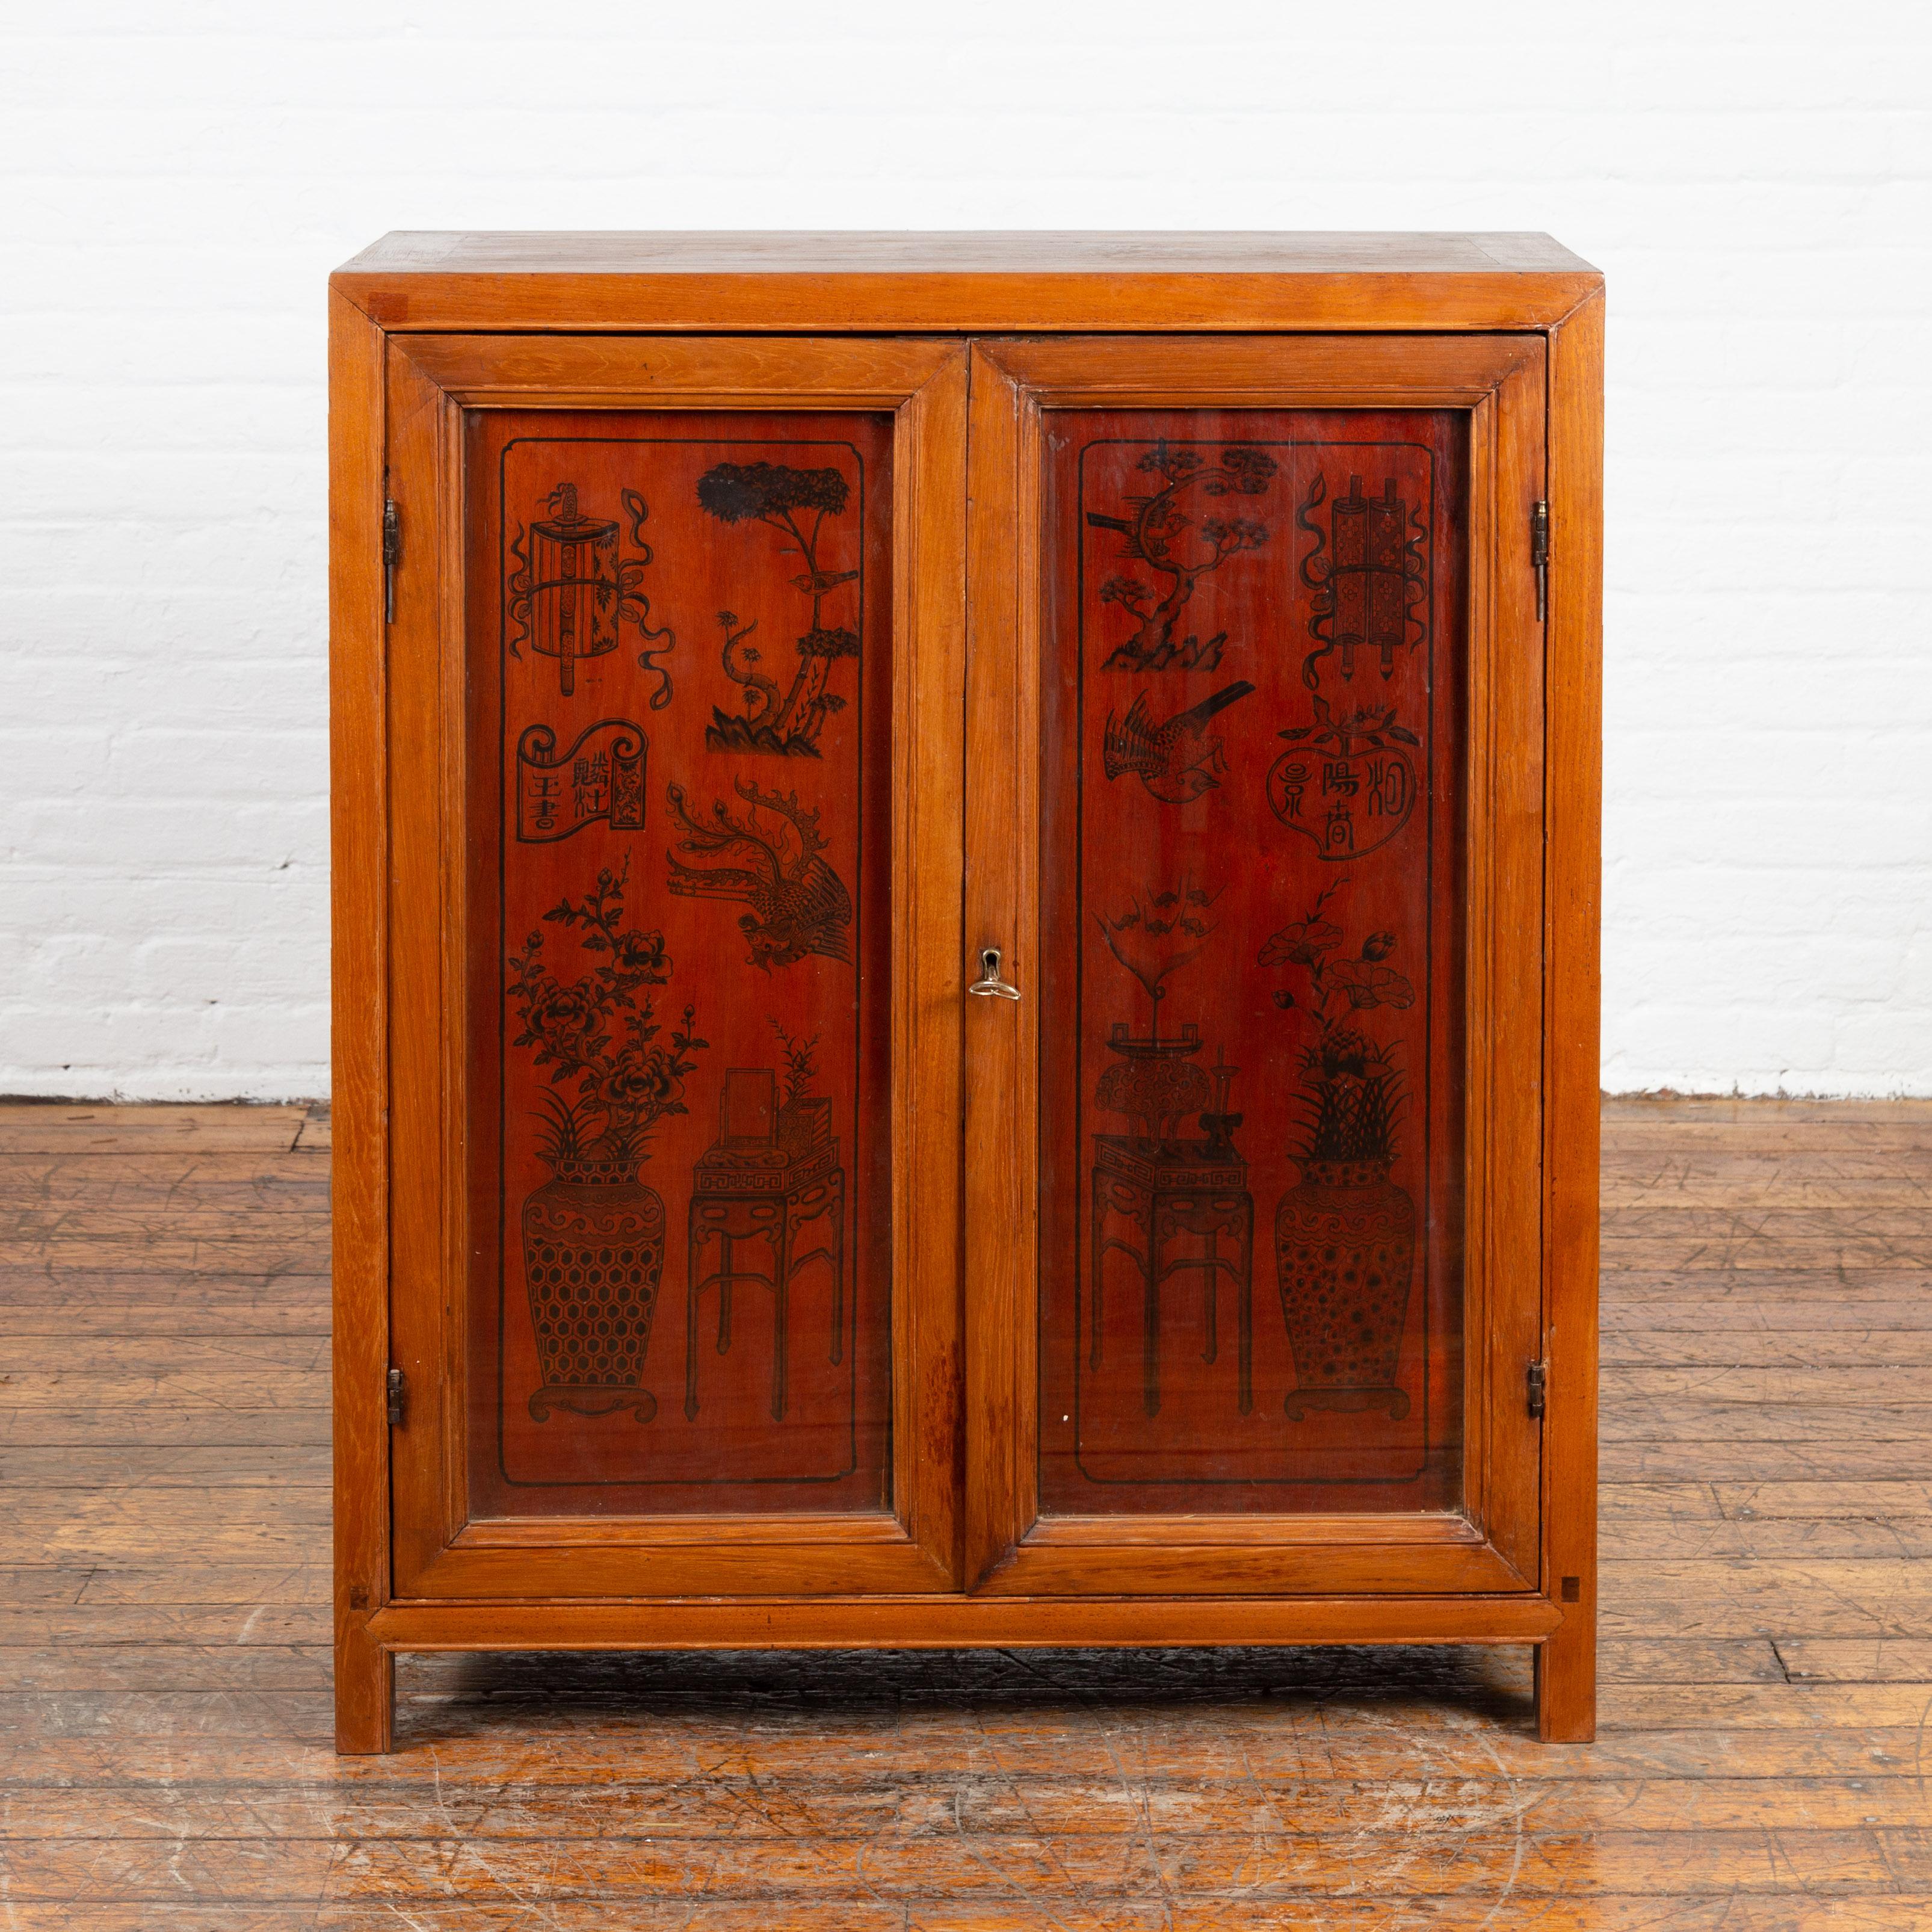 An antique Chinese cabinet from the early 20th century, with ink decorated panels behind glass doors. Created in China during the early years of the 20th century, this two-toned cabinet features a rectangular top sitting above two doors made of